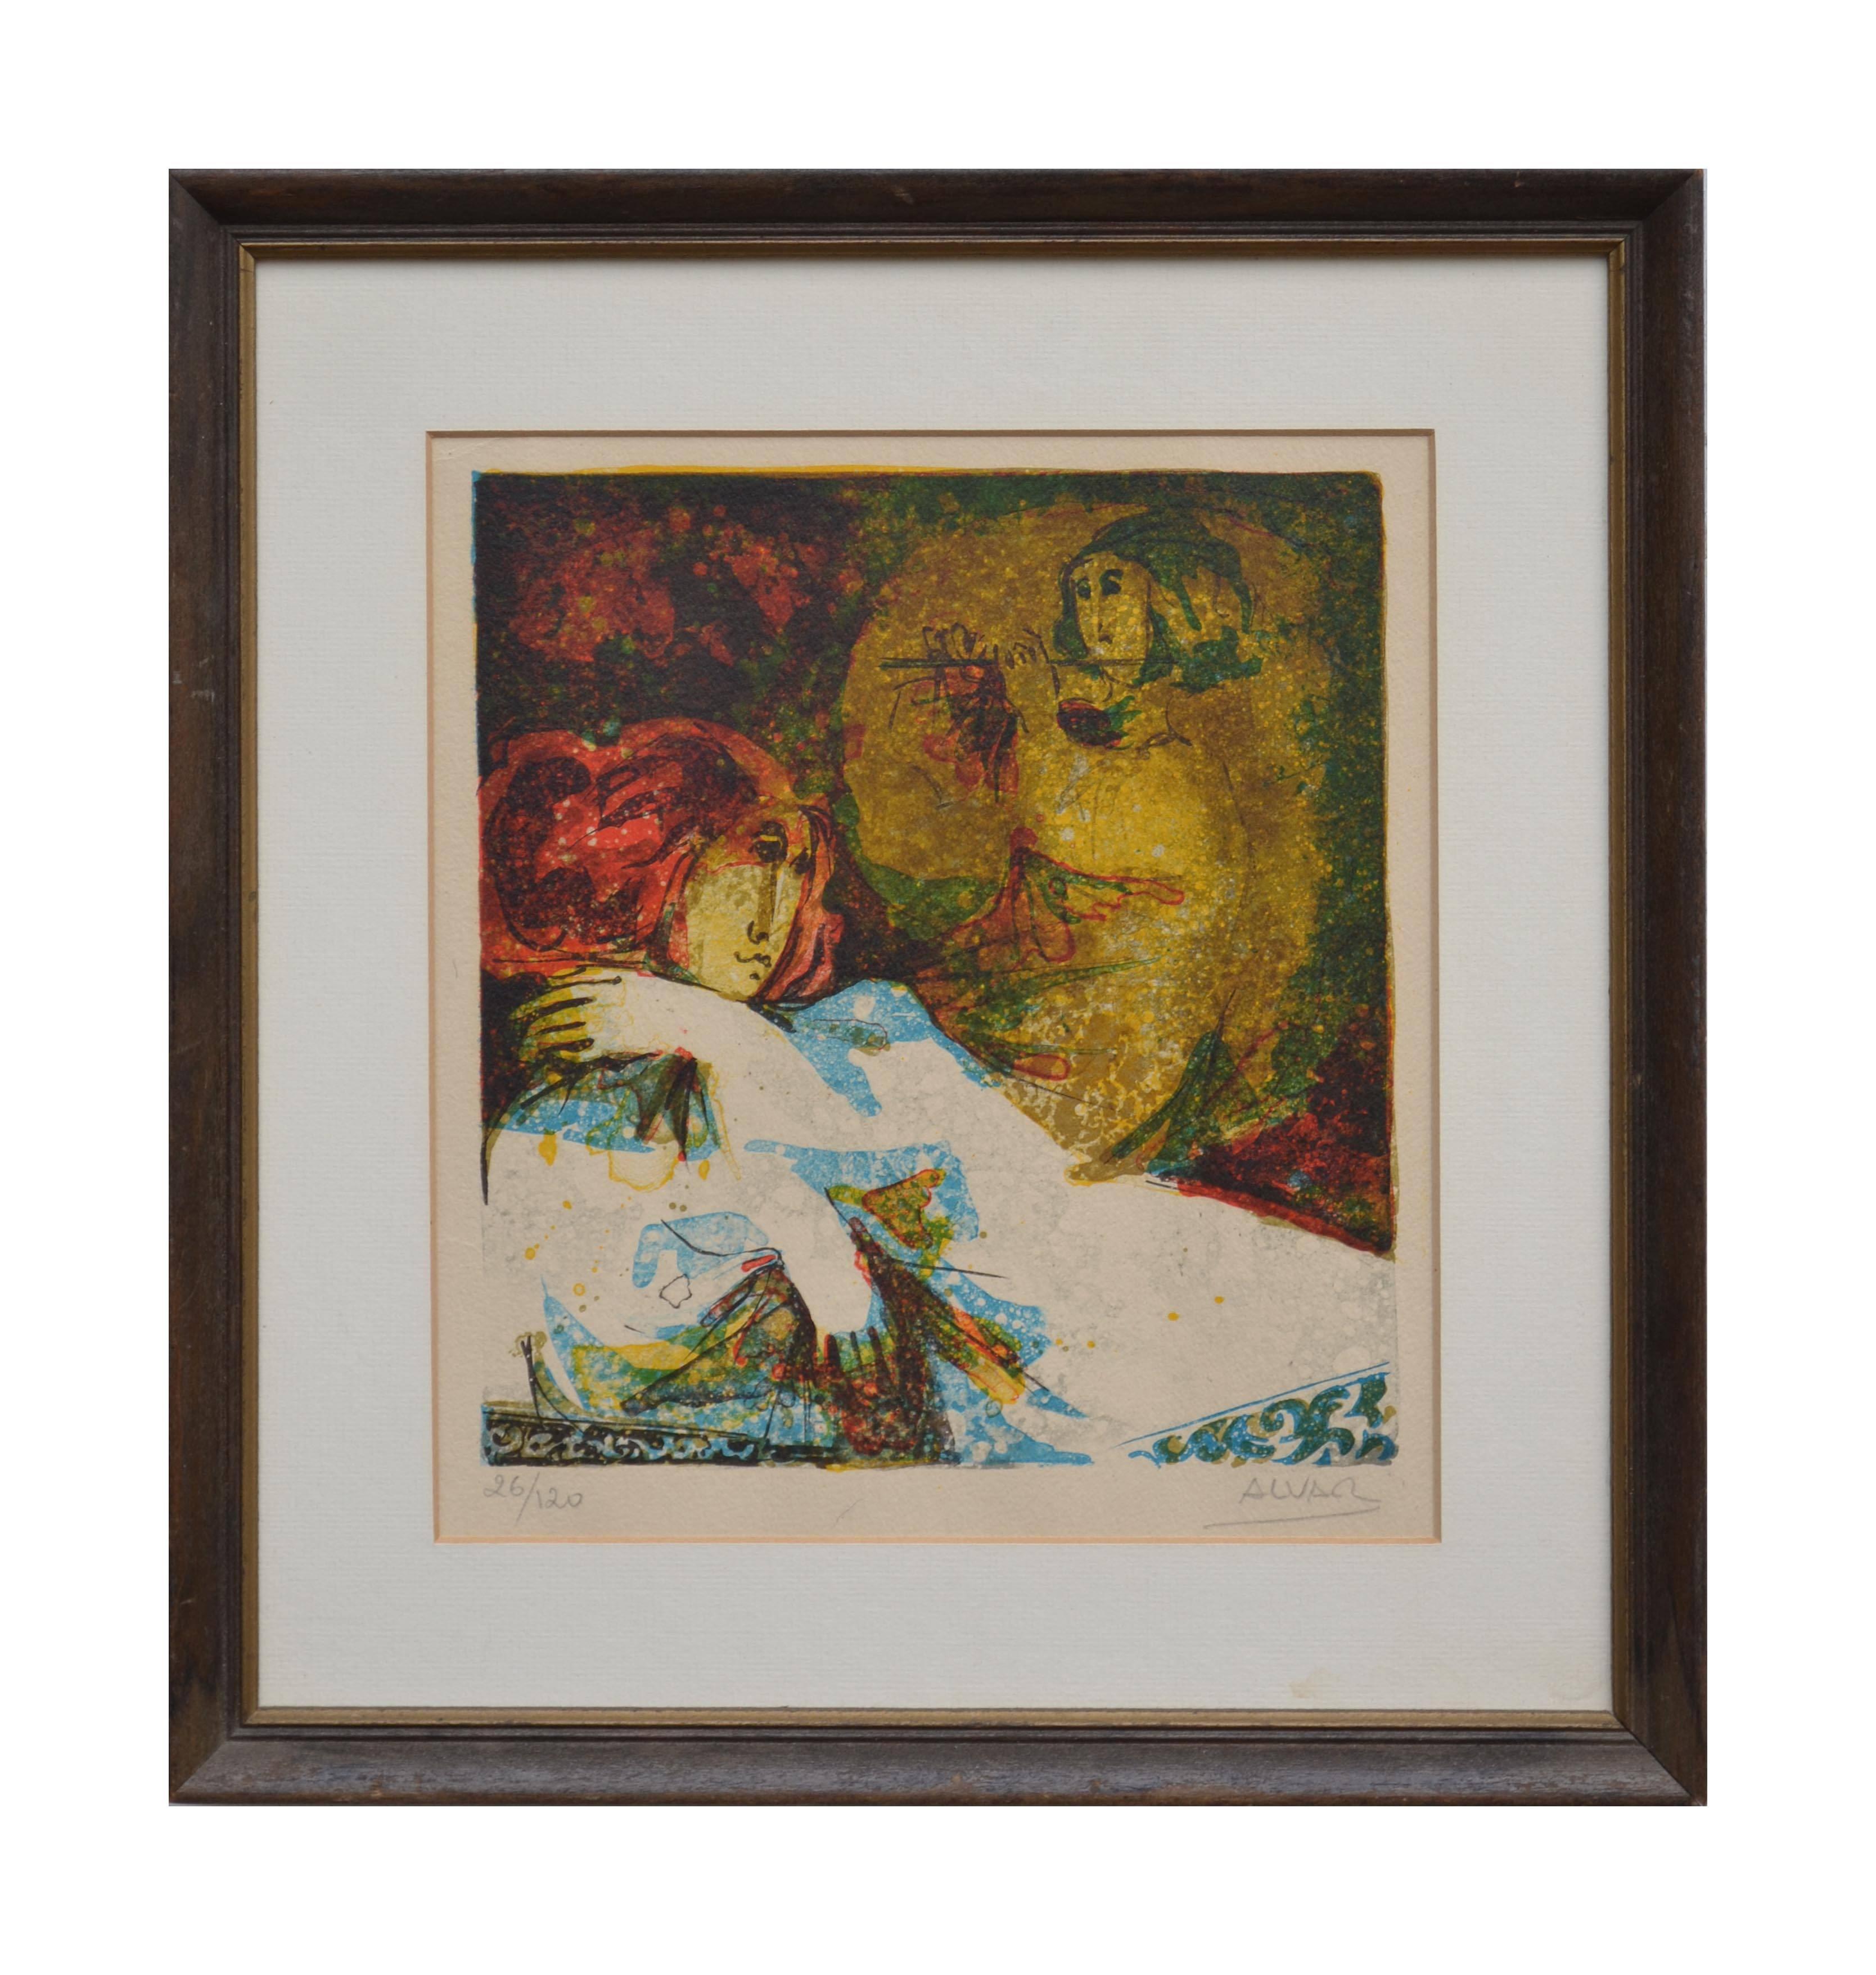 Sunol Alvar Abstract Print - Woman and Flute Player